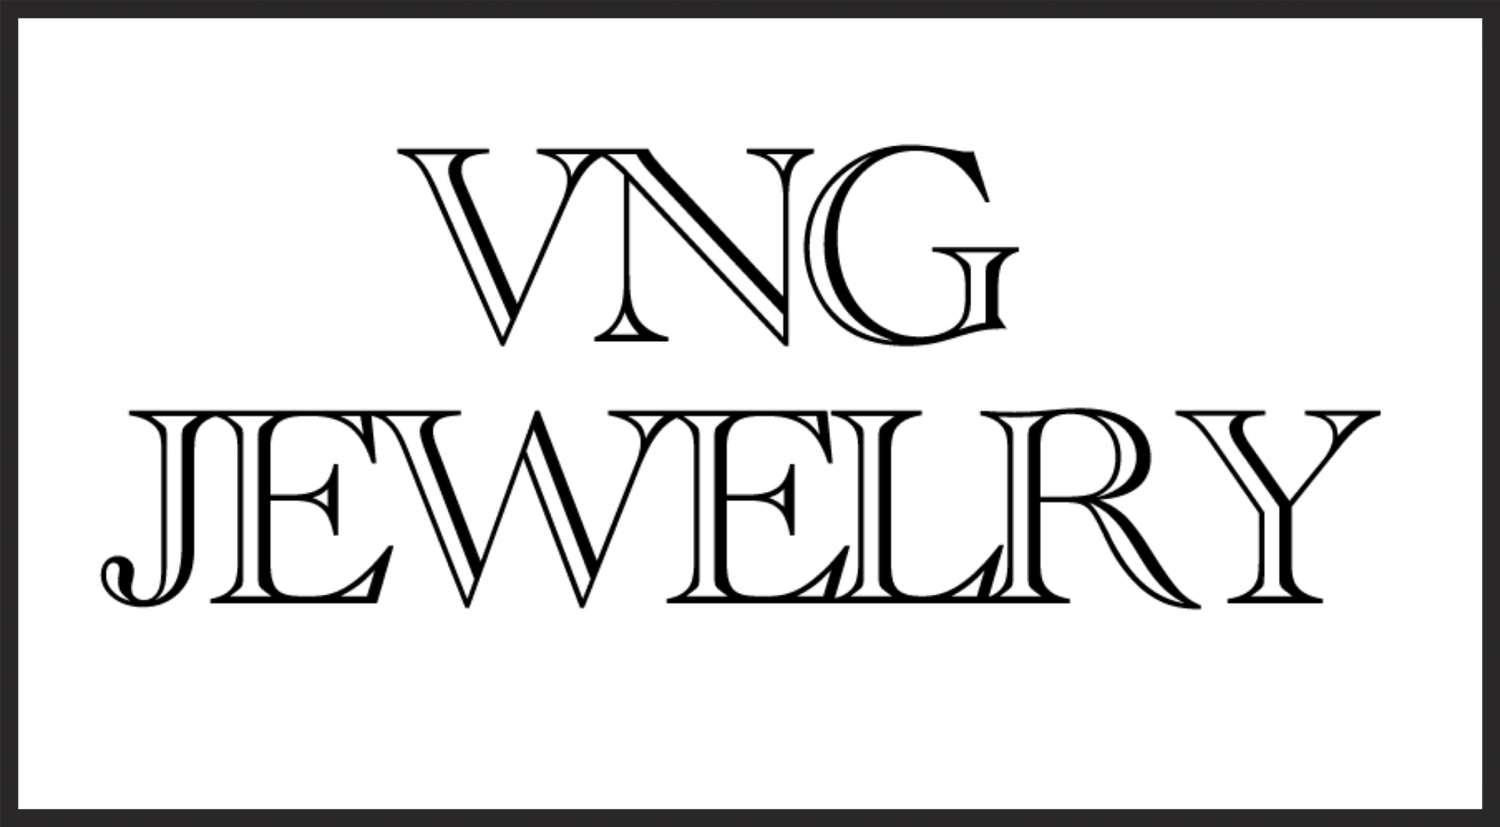 VNG JEWELRY